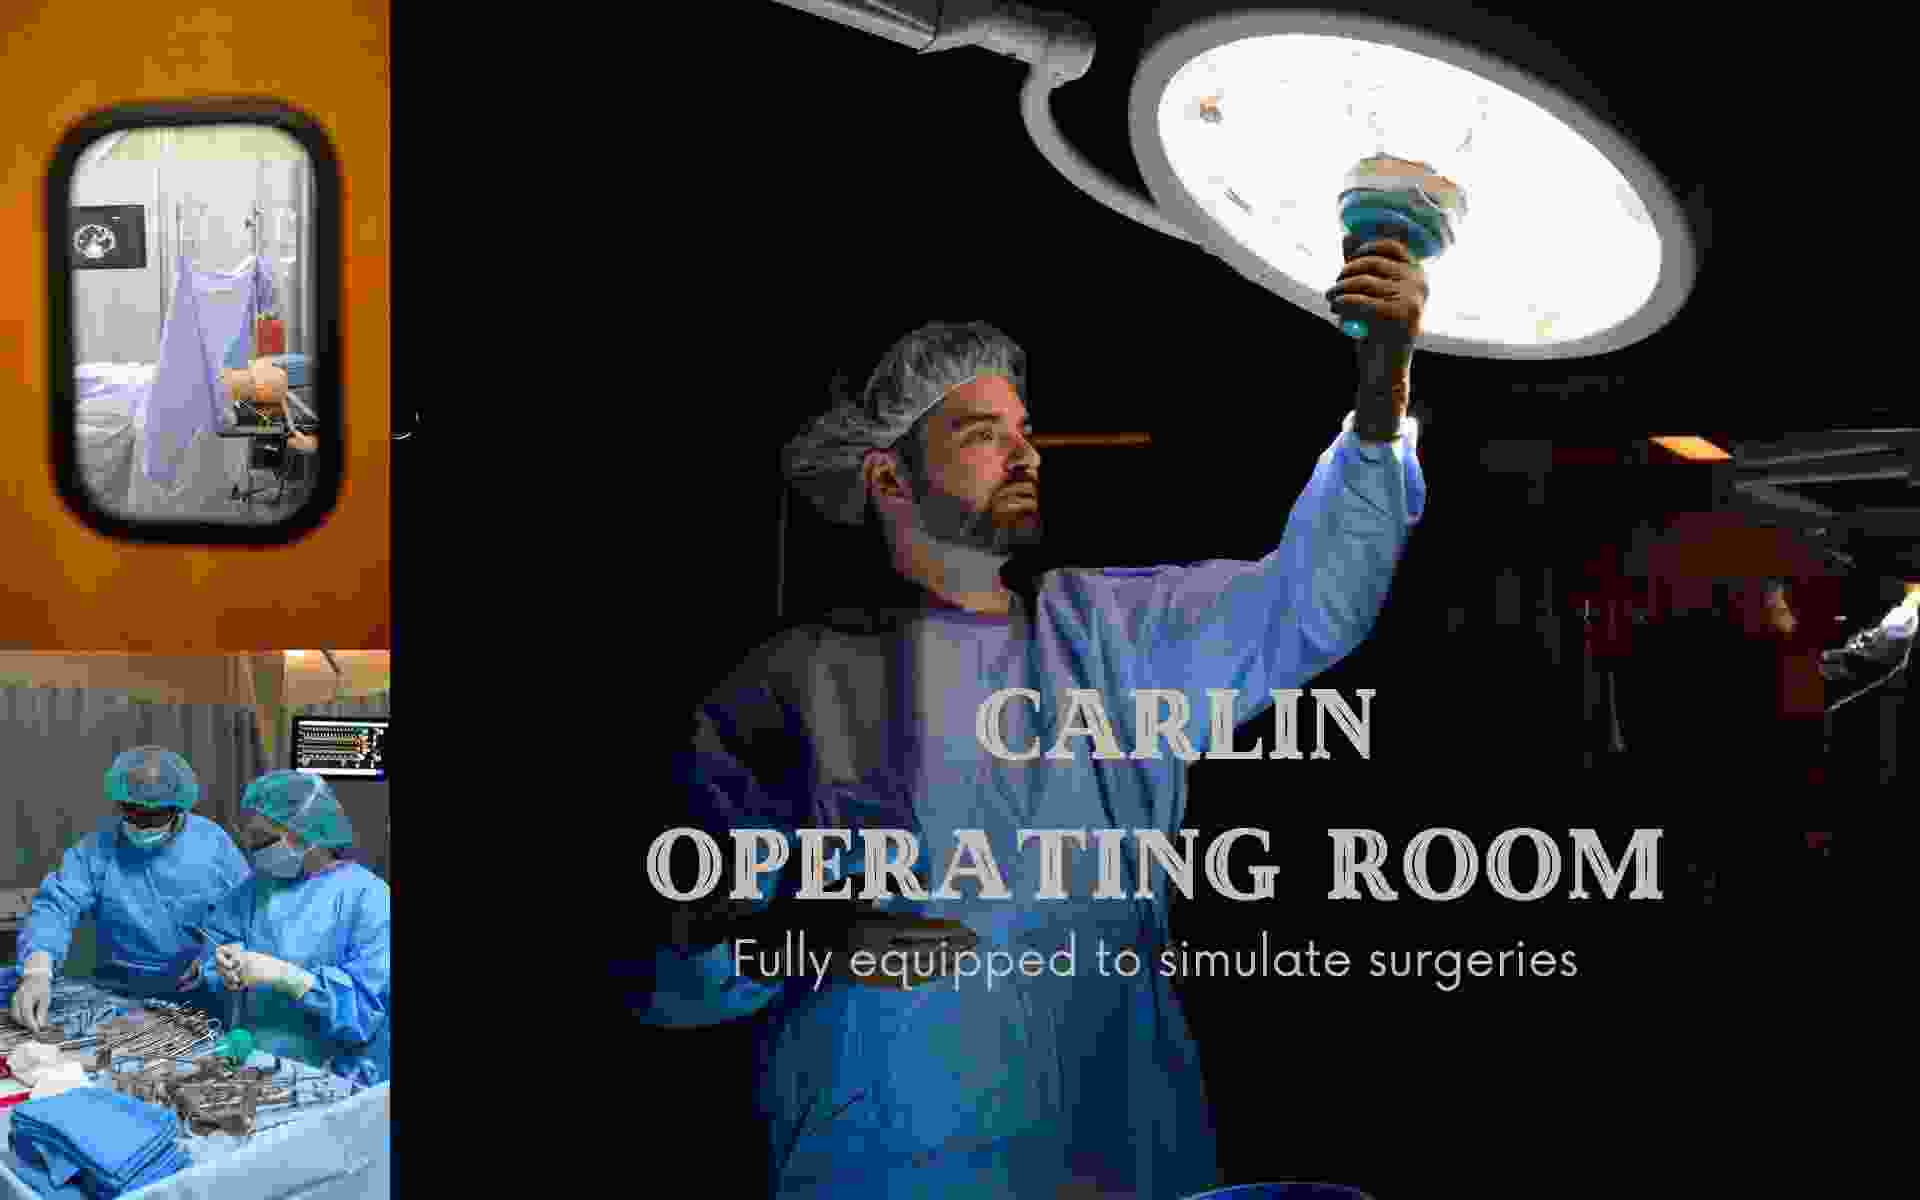 iCELS-simulation-experiential-learning-Massachusetts-New-England-Boston-Burlington-Springfield-Worcester-40-years-Carlin-Opearting-Room-surgery-scrub